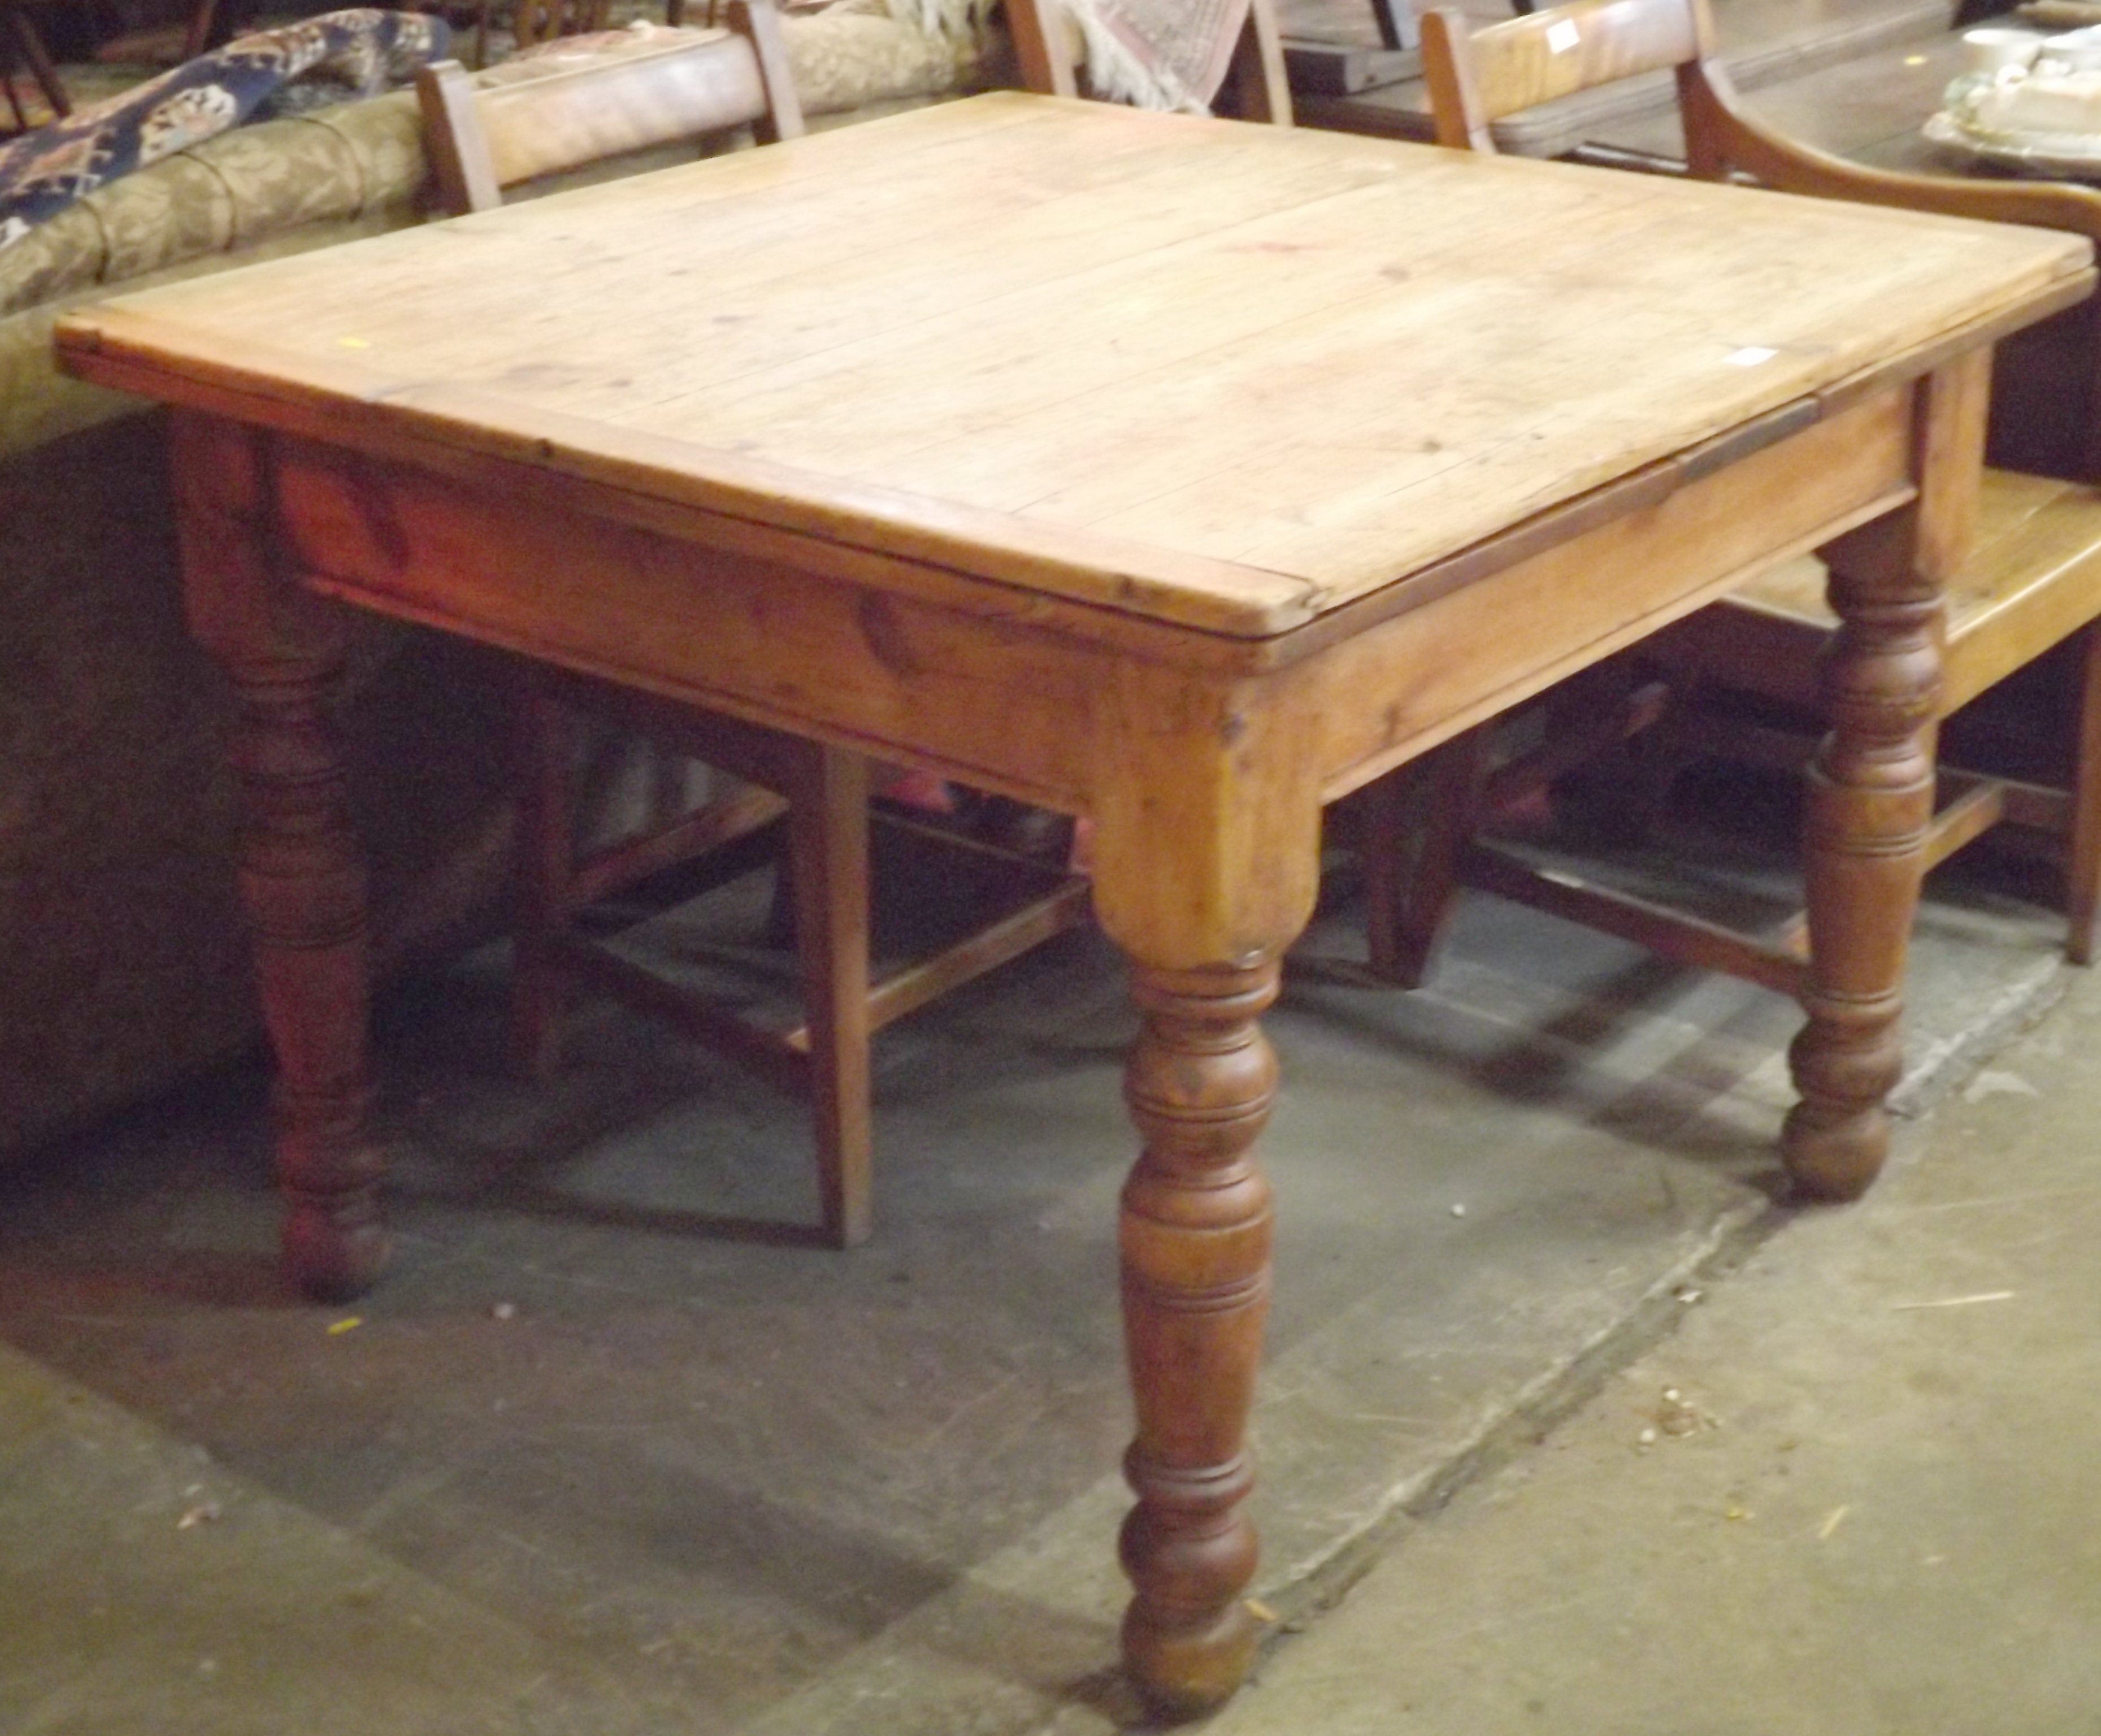 Victorian Stripped Pine Draw Leaf Dining Table 75" x 72" extended